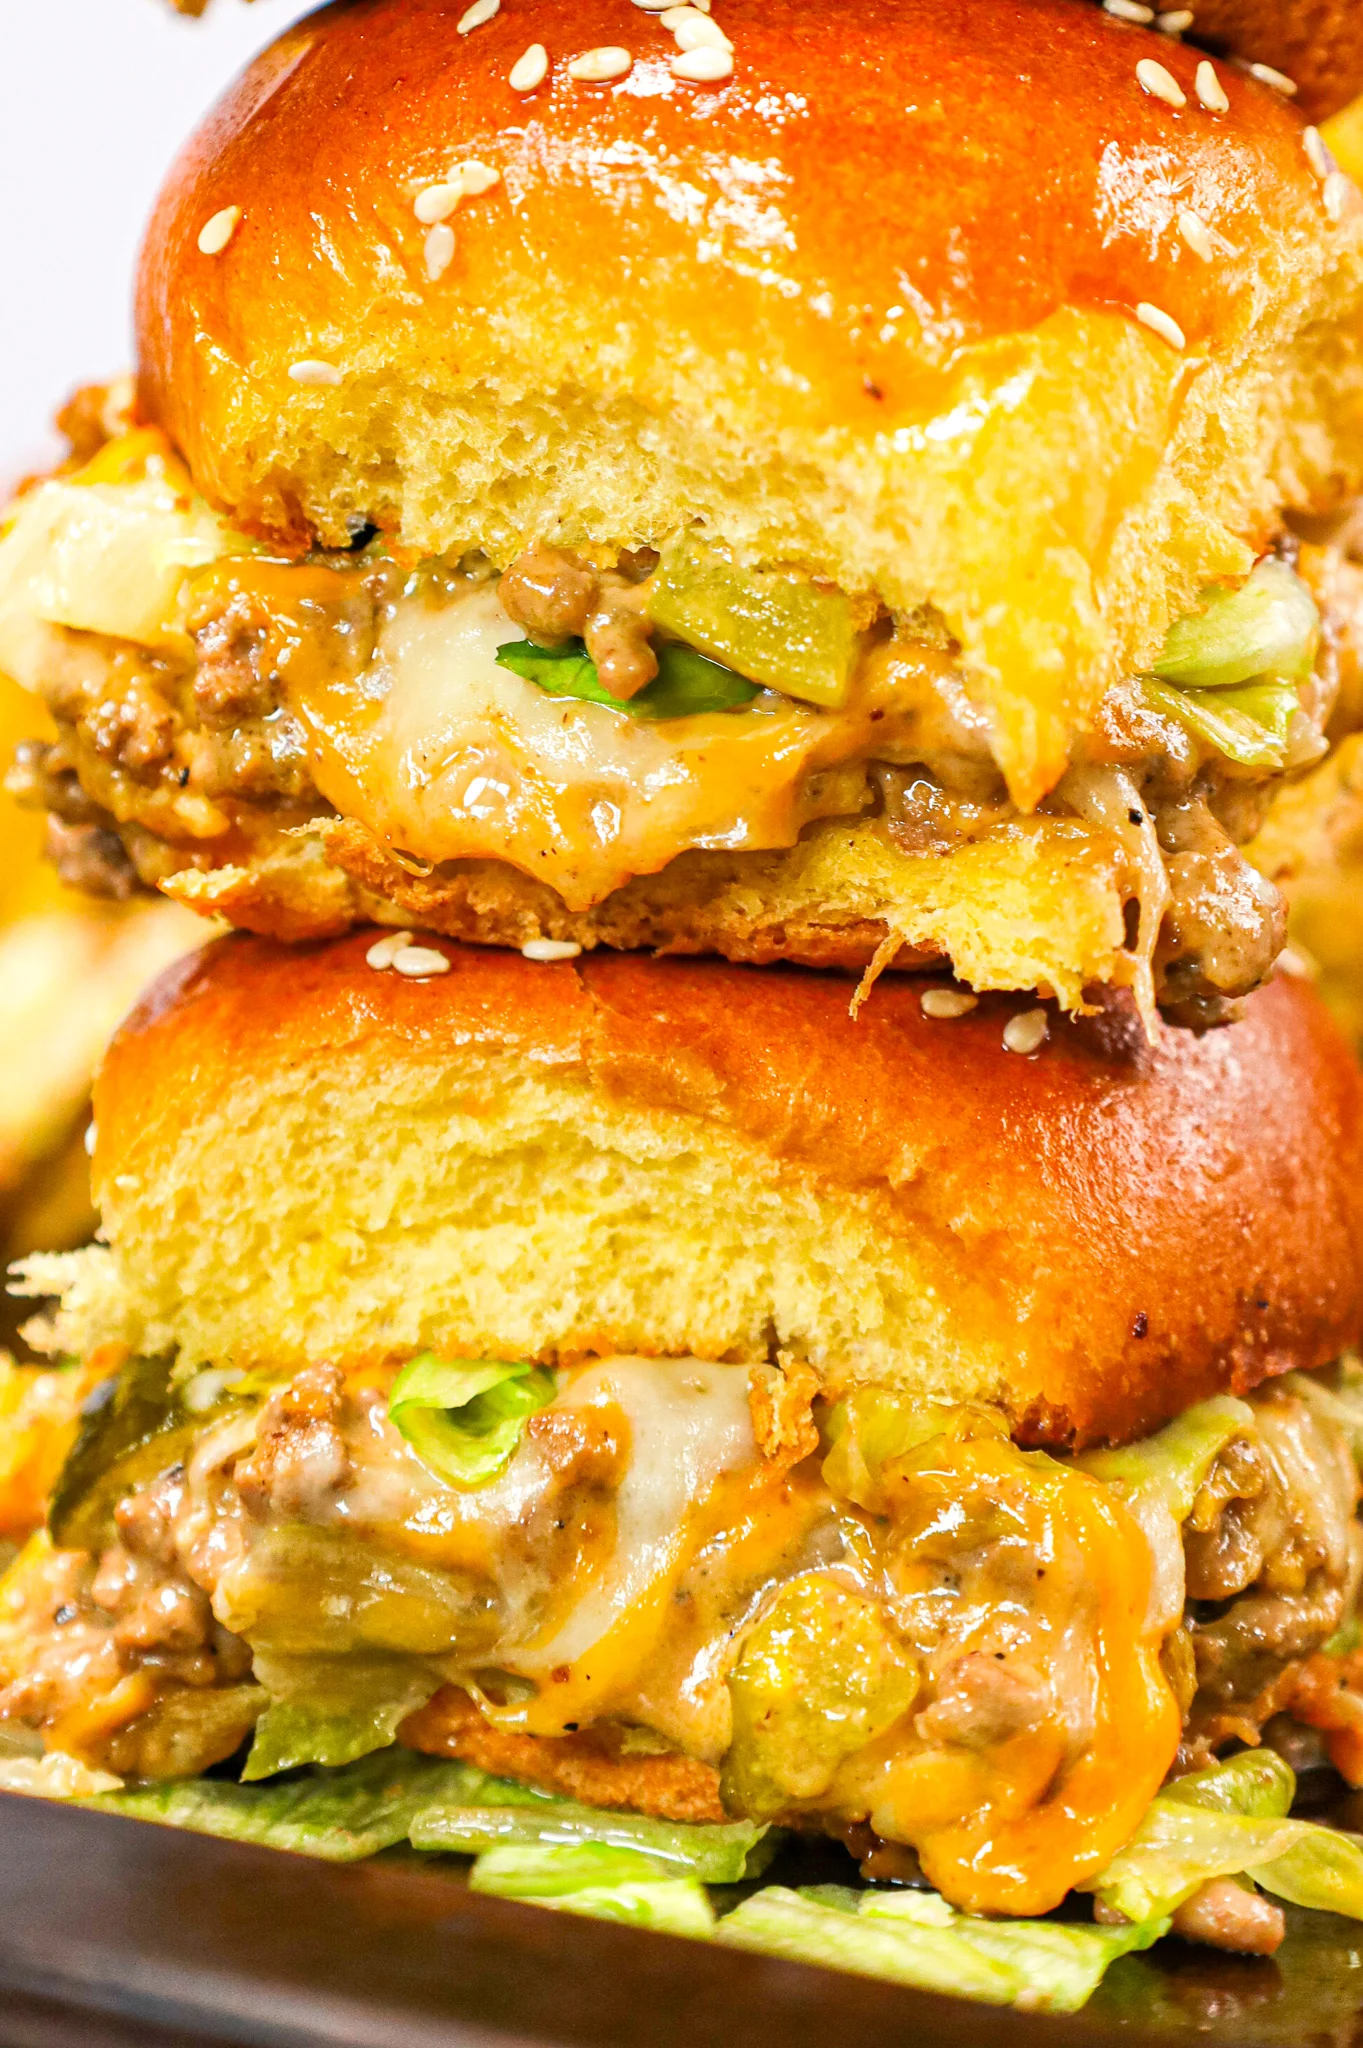 Big Mac Sliders are an easy weeknight dinner recipe made with ground beef, onion, pickles, mayo, Thousand Island dressing, cheddar cheese and shredded lettuce all piled on to dinner rolls topped with sesame seeds.